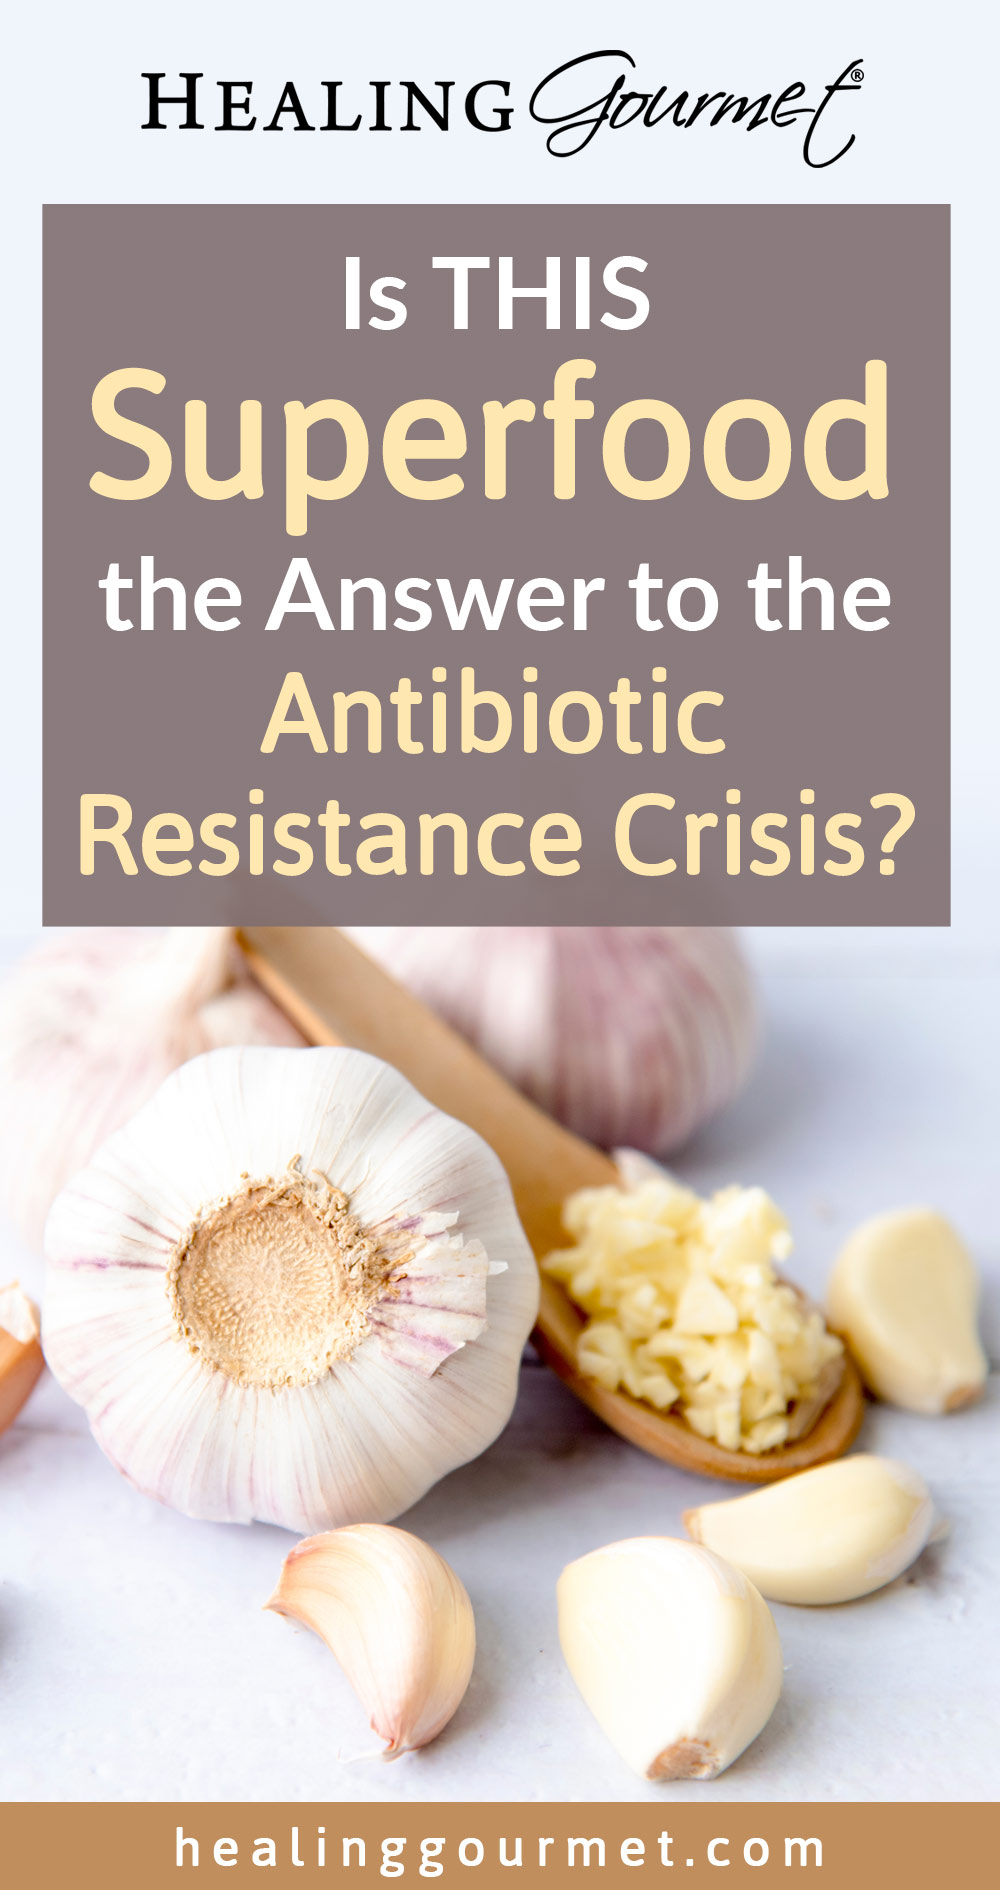 The Dangers of Antibiotic Resistance (and The Superfood Cure!)